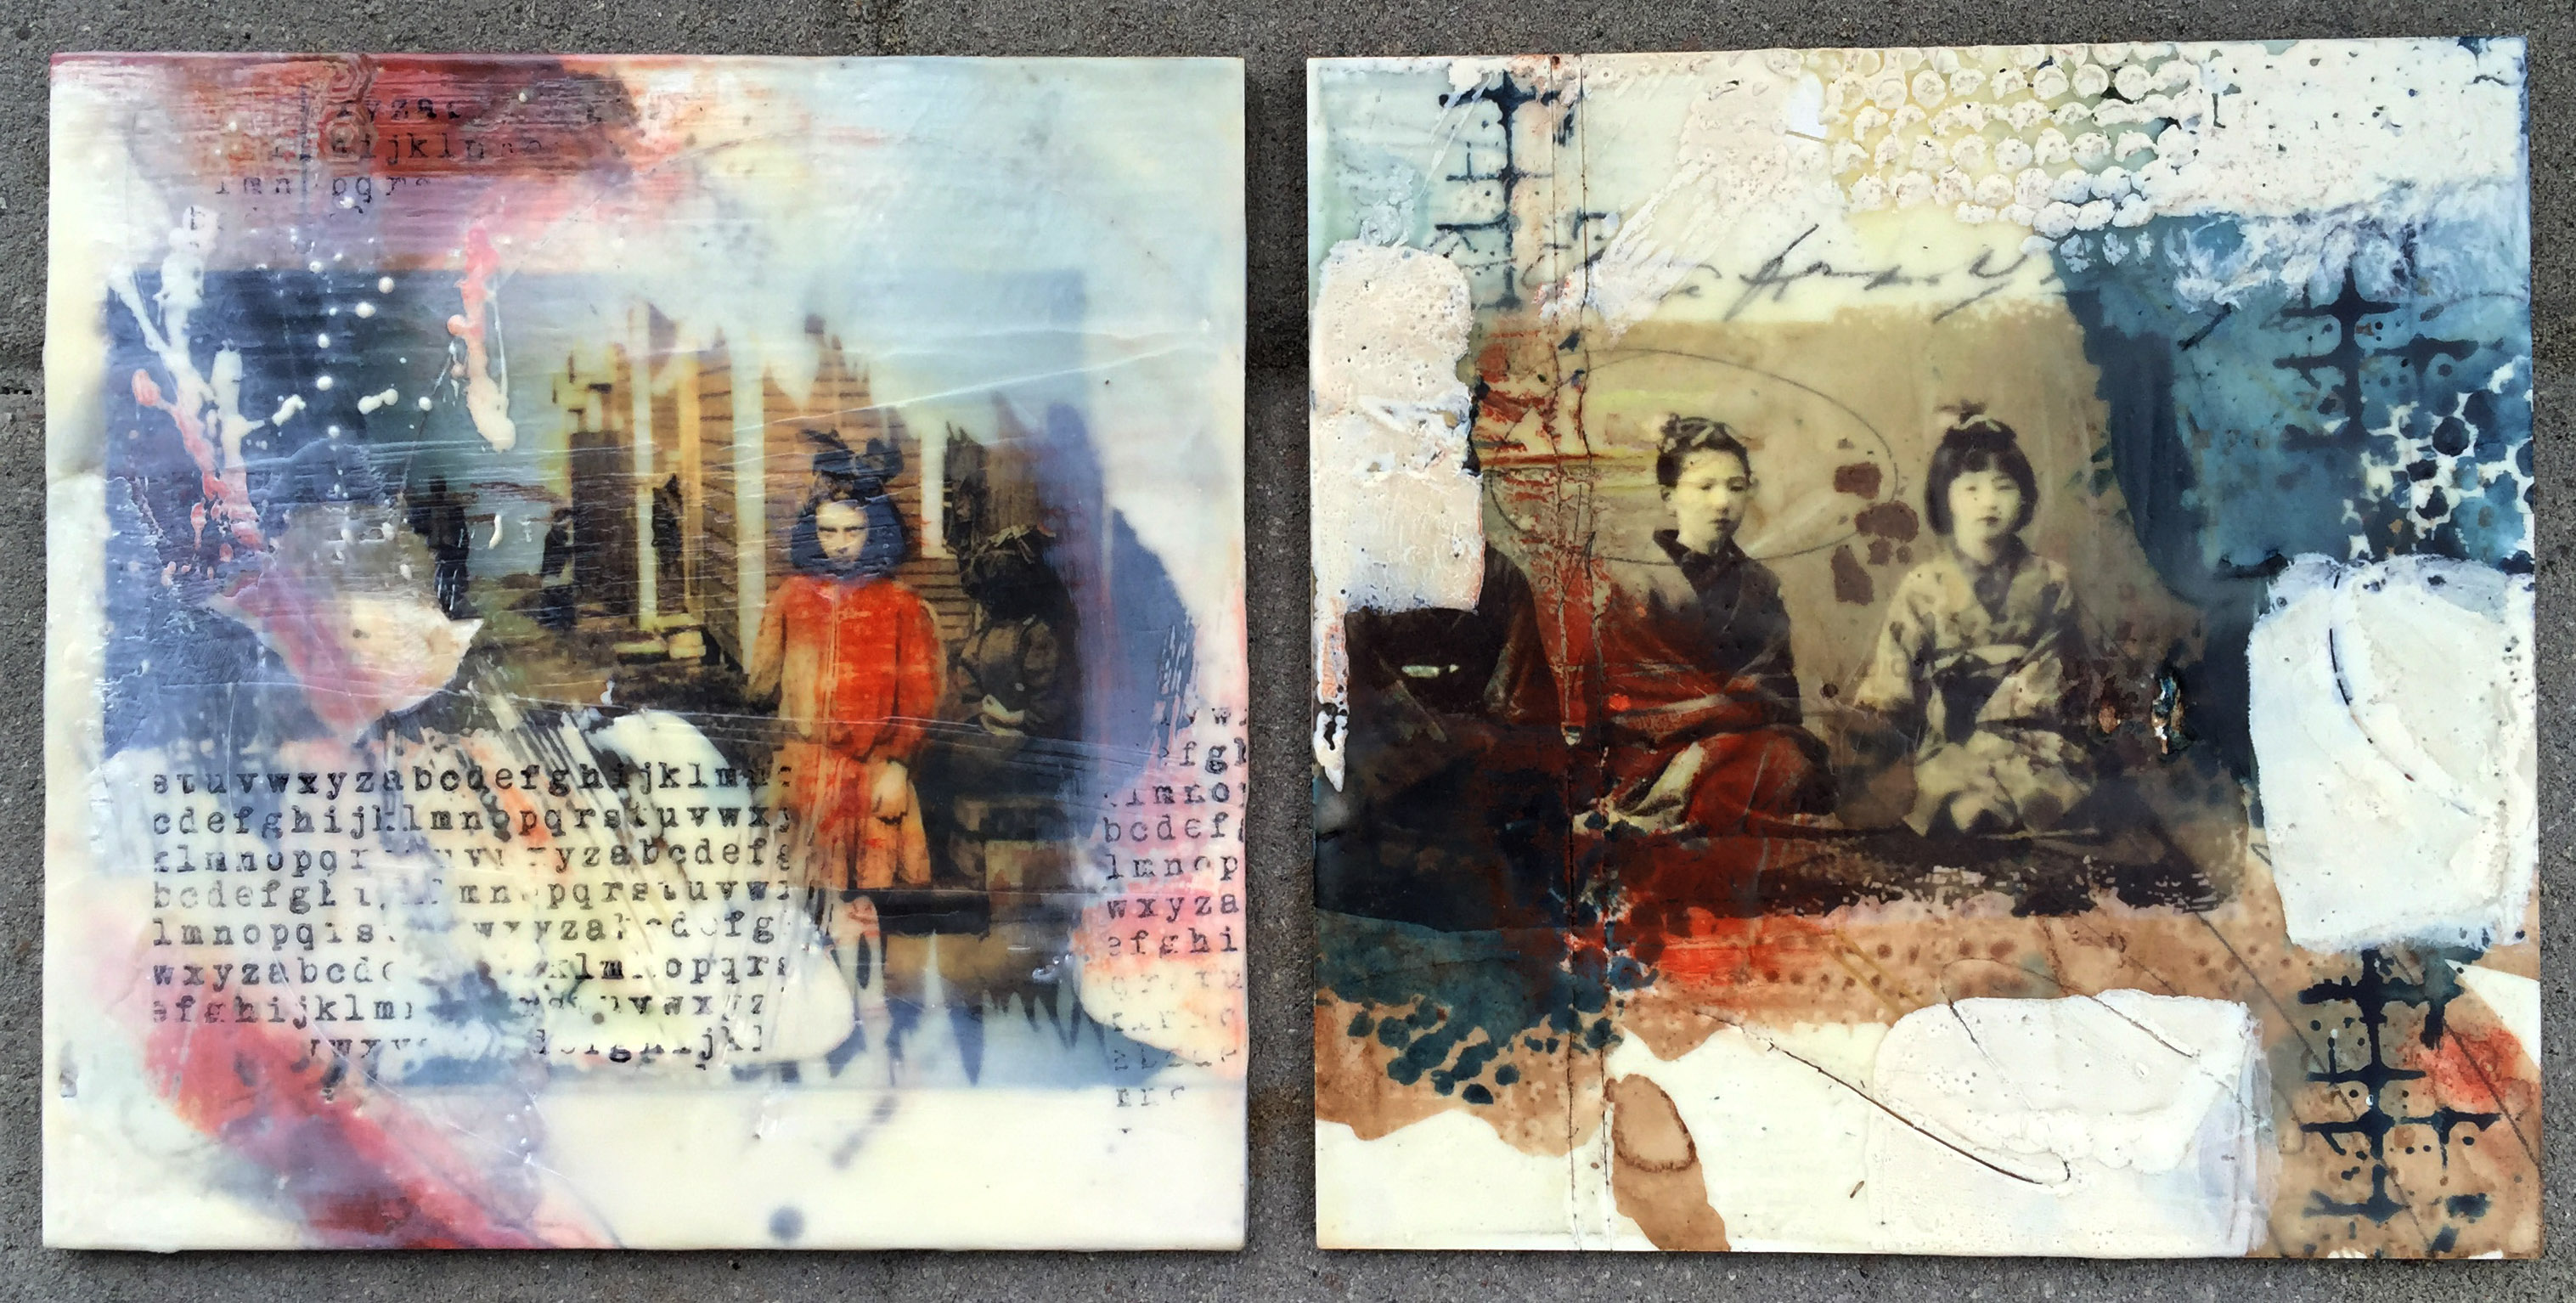 Experimental encaustic work on board with wax, digital images, watercolor and pan pastels